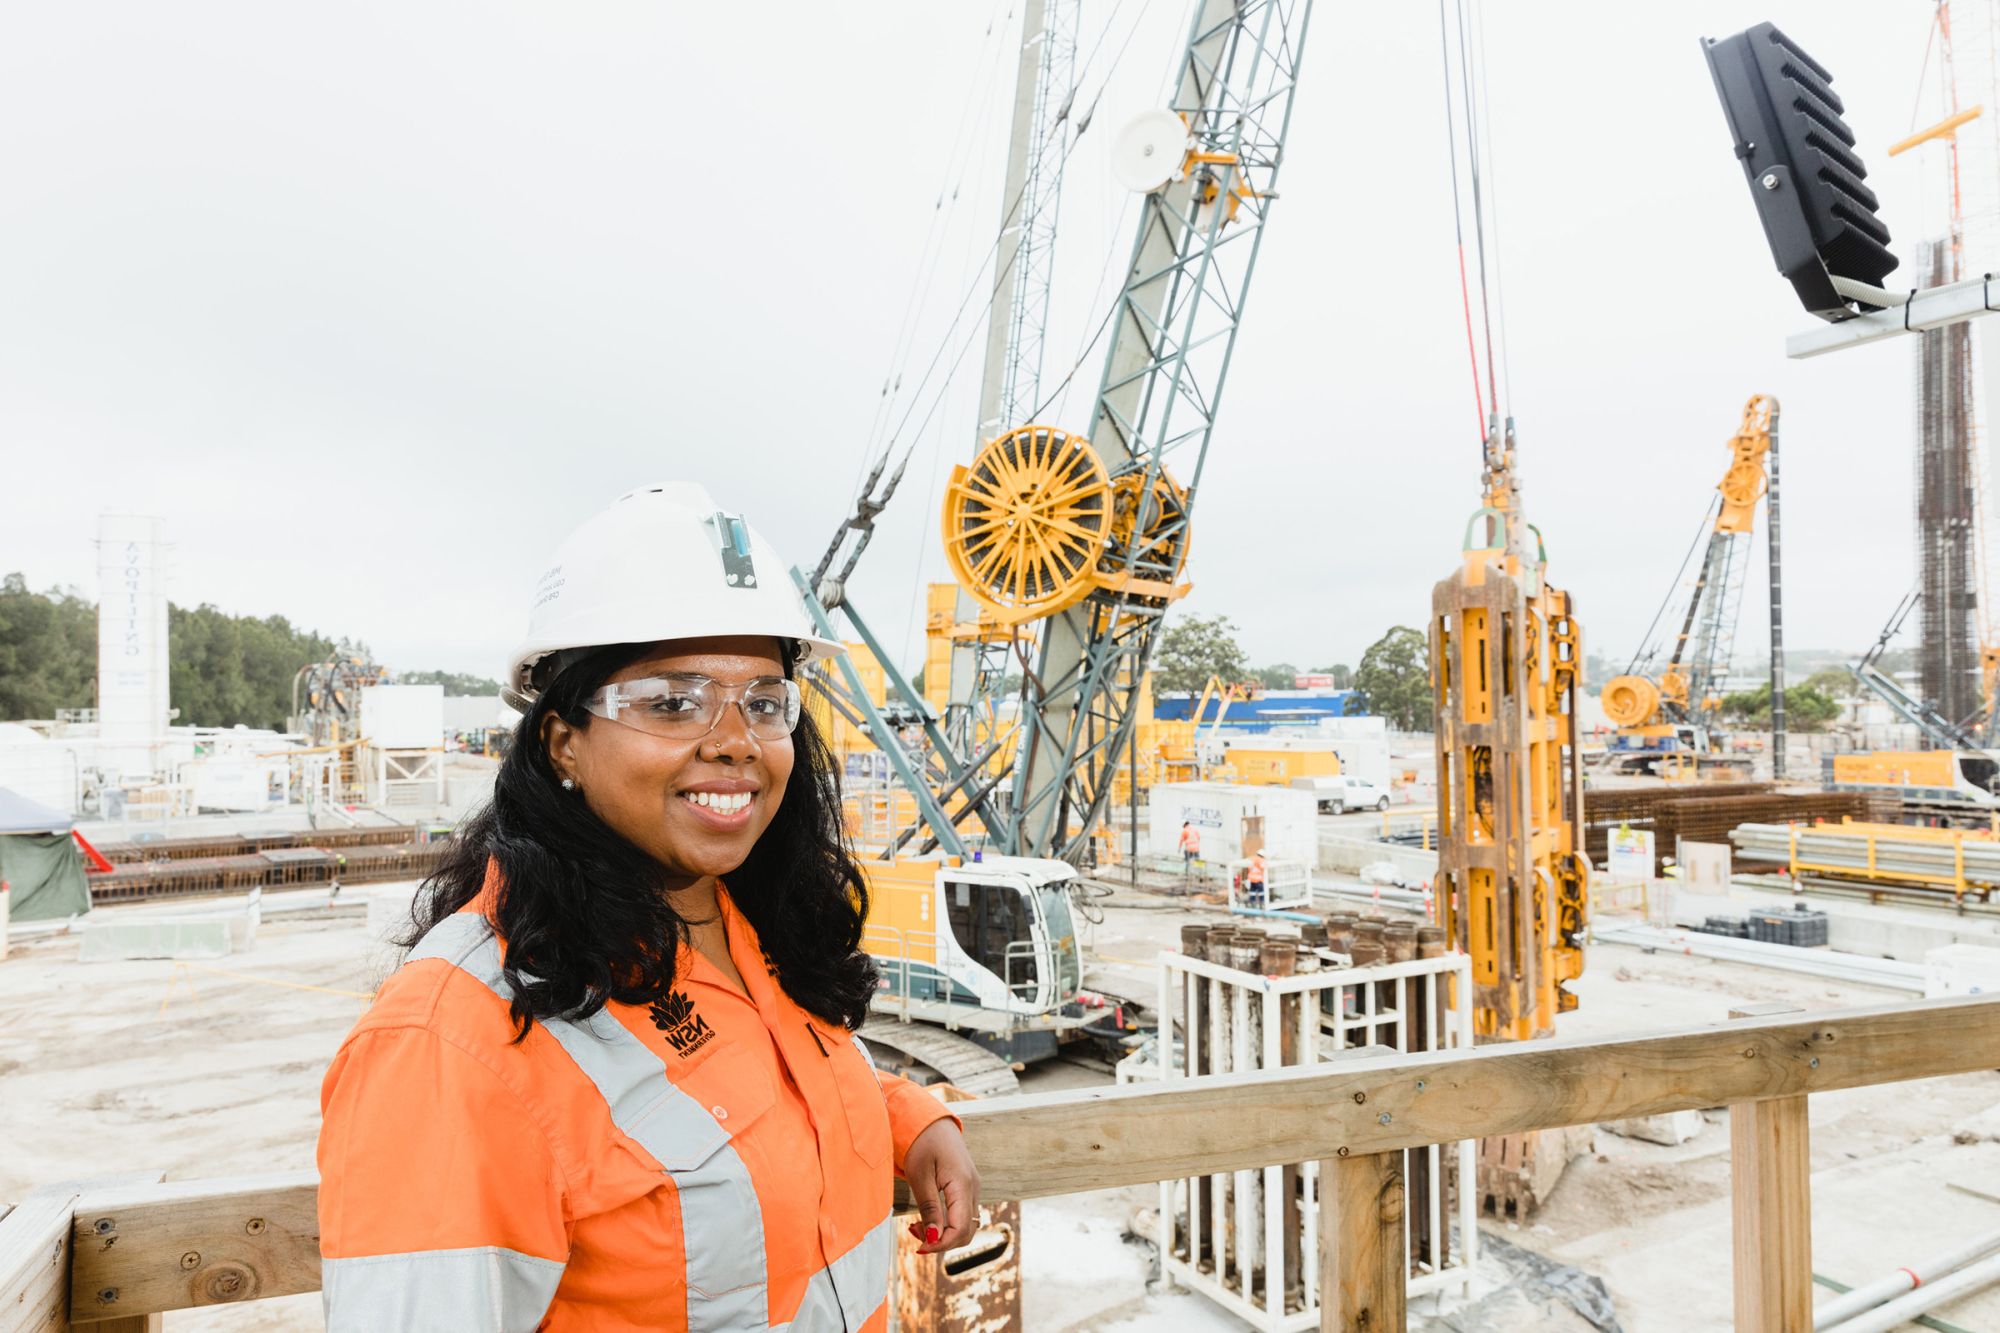 Loshika is standing on a construction site in hi-vis and a hard hat. She is looking at the camera smiling and has machinery behind her.